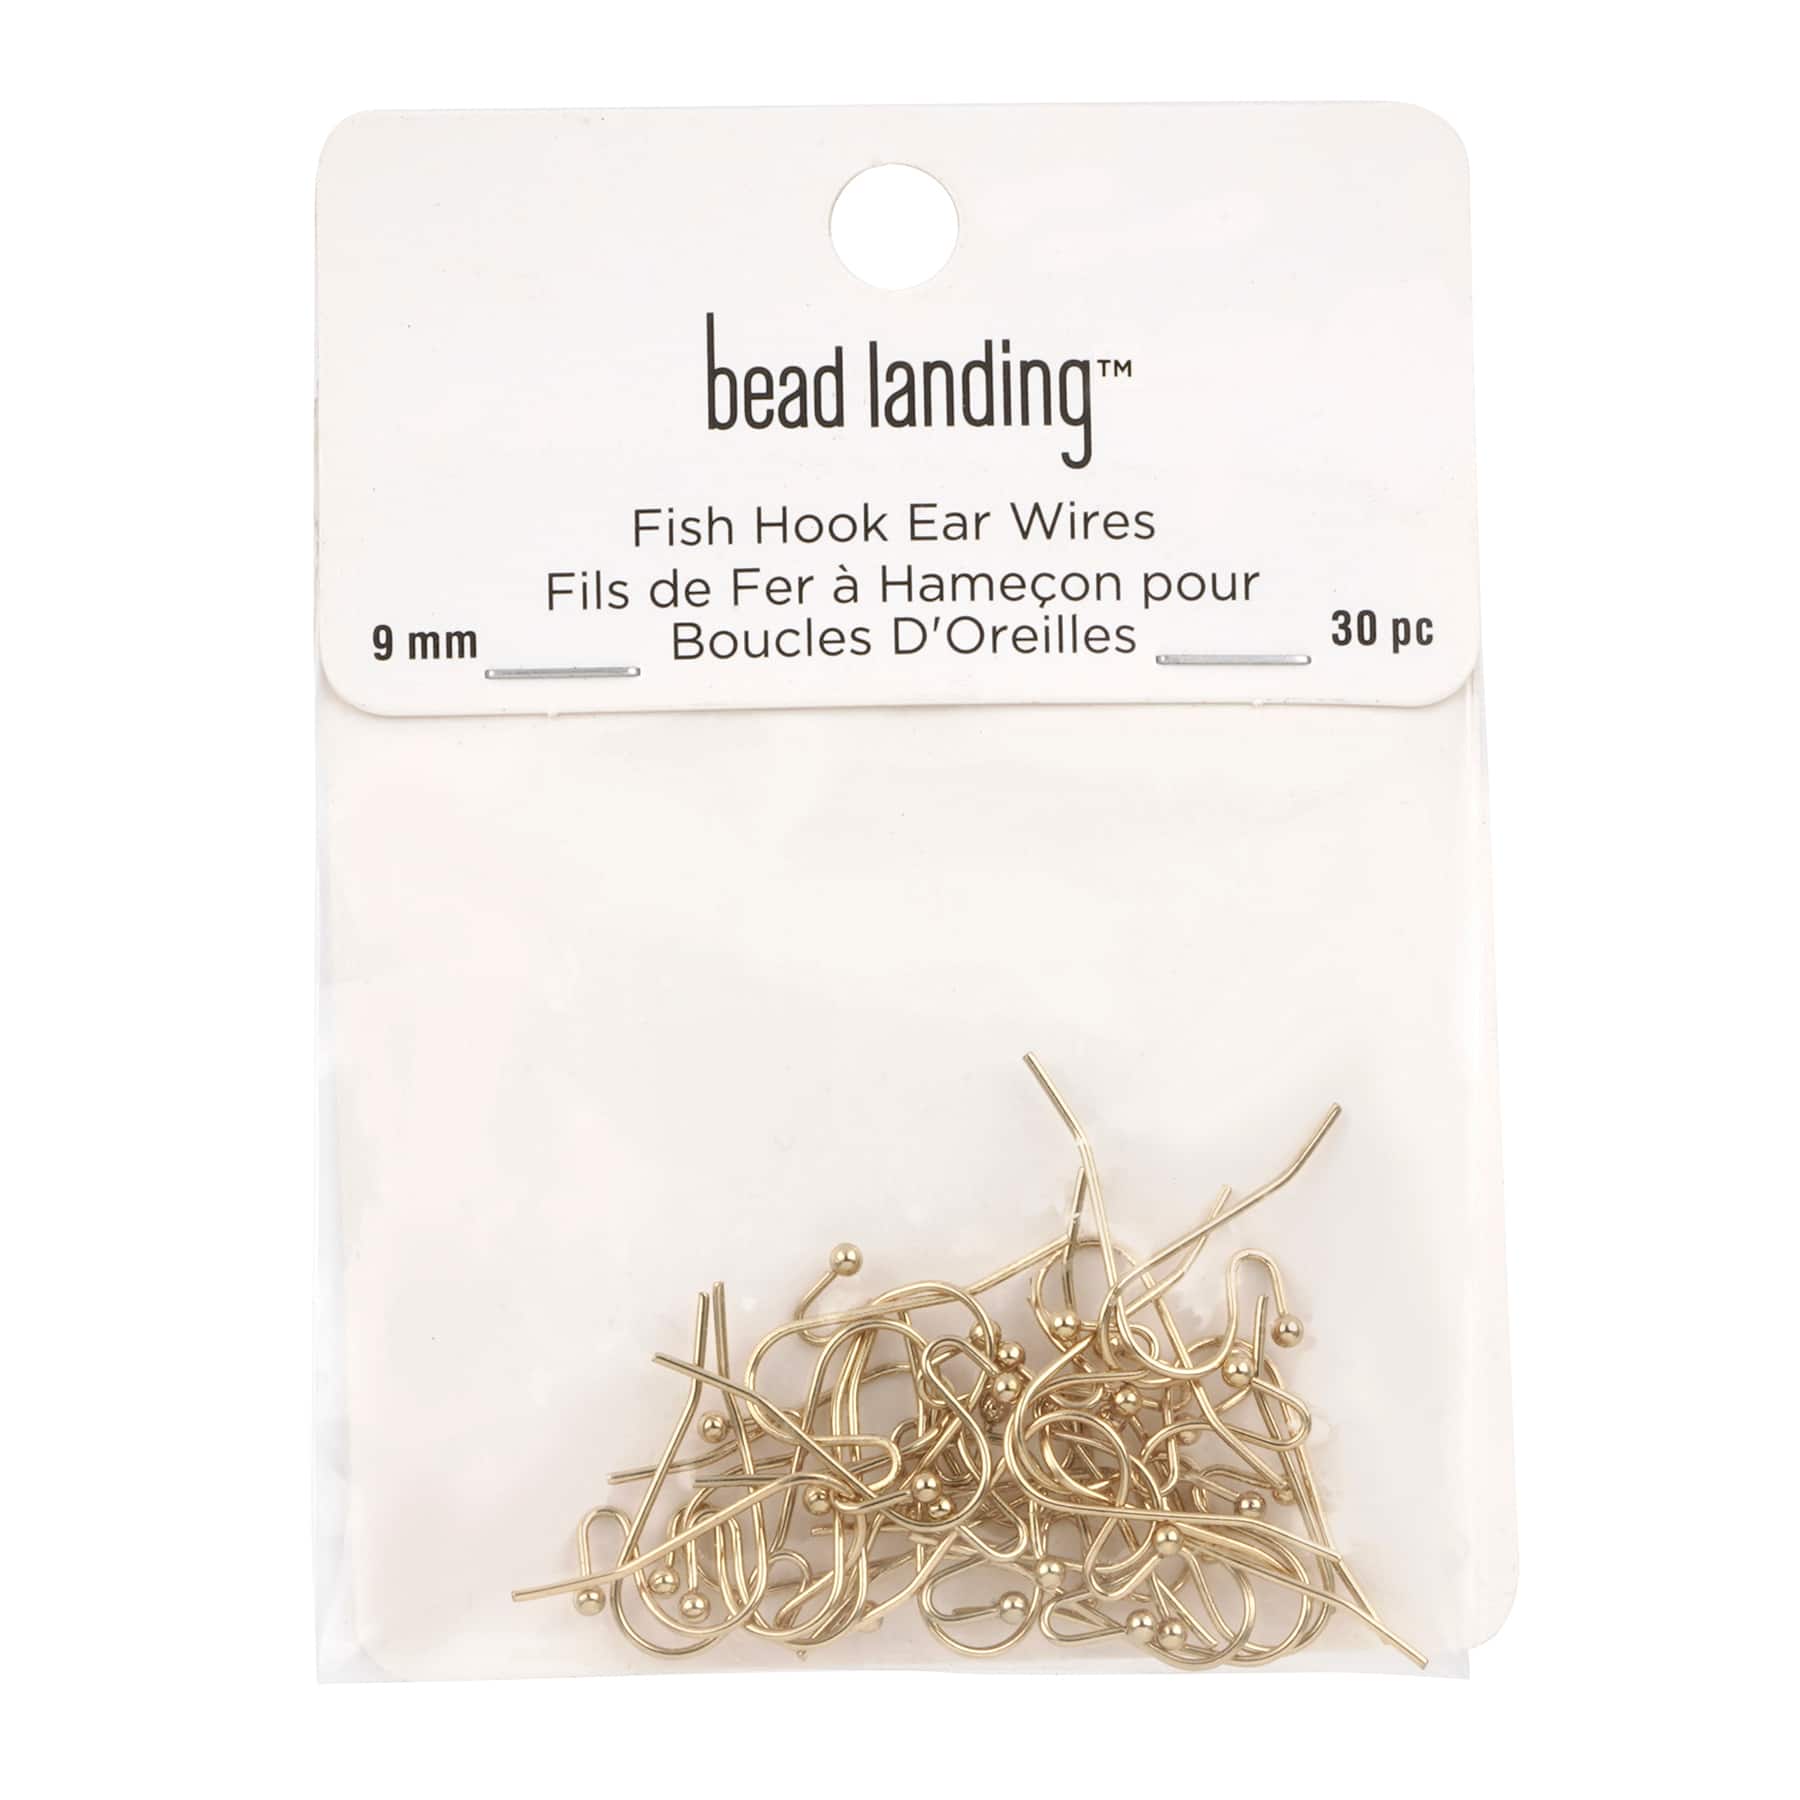 12mm Sterling Silver Fish Hook Ear Wires, 2ct. by Bead Landing | Michaels